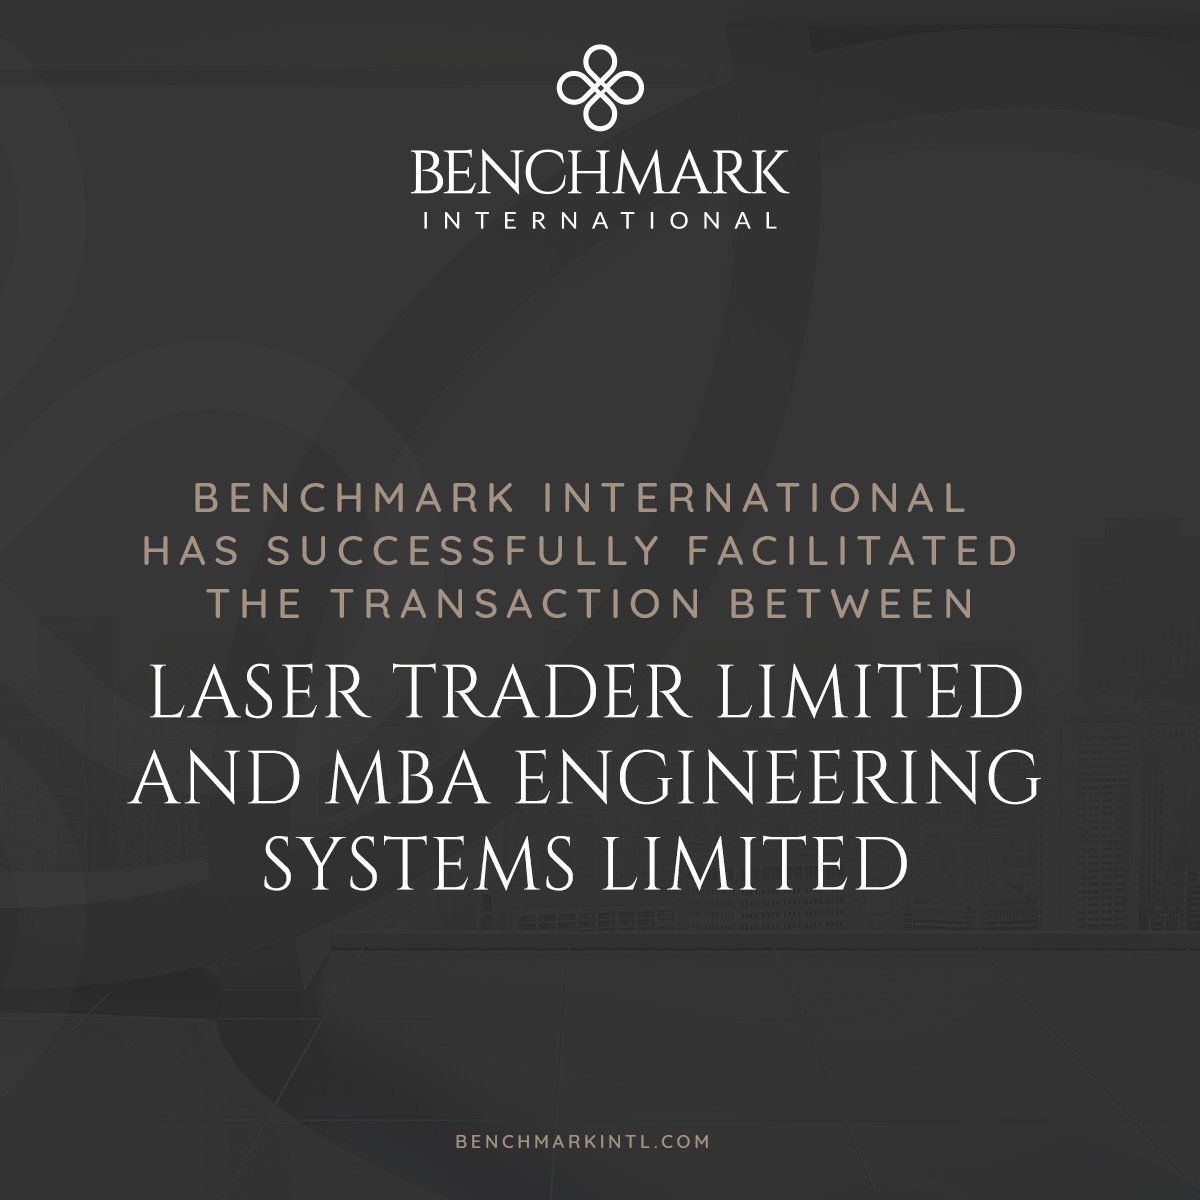 MBA Engineering Acquires Laser Trader